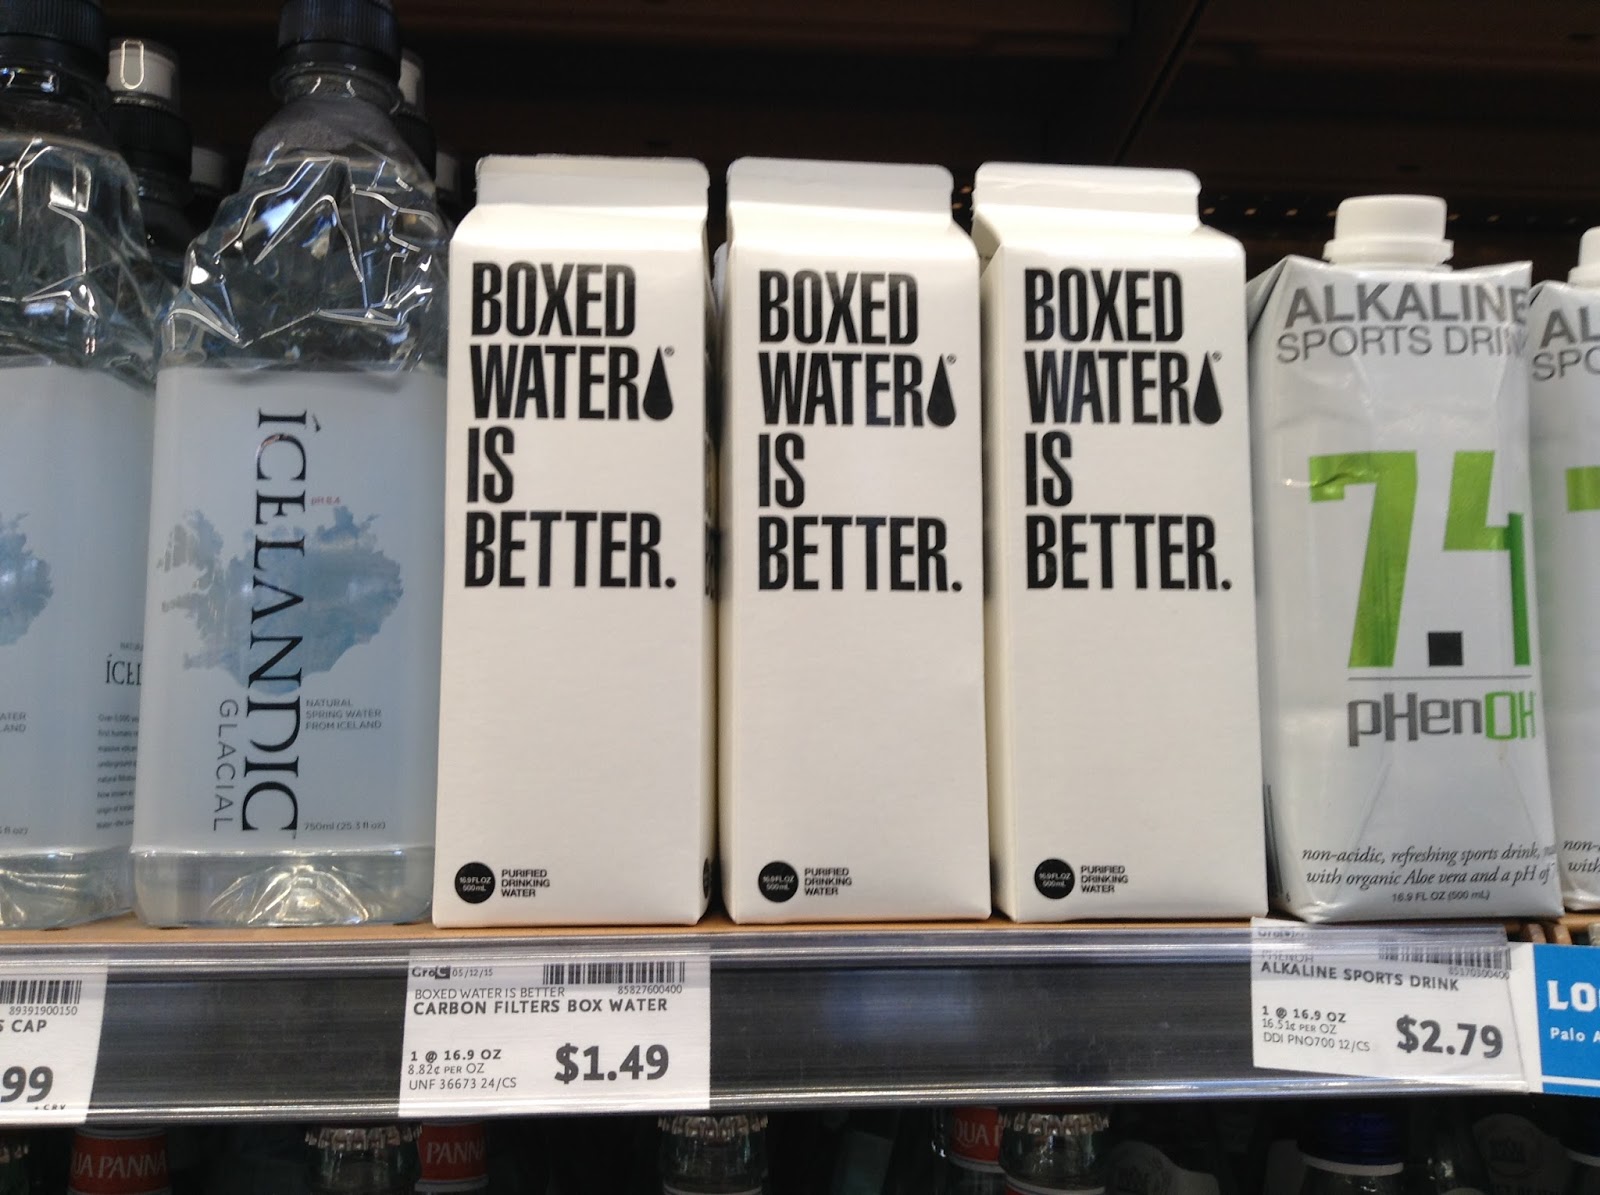 Boxed water price